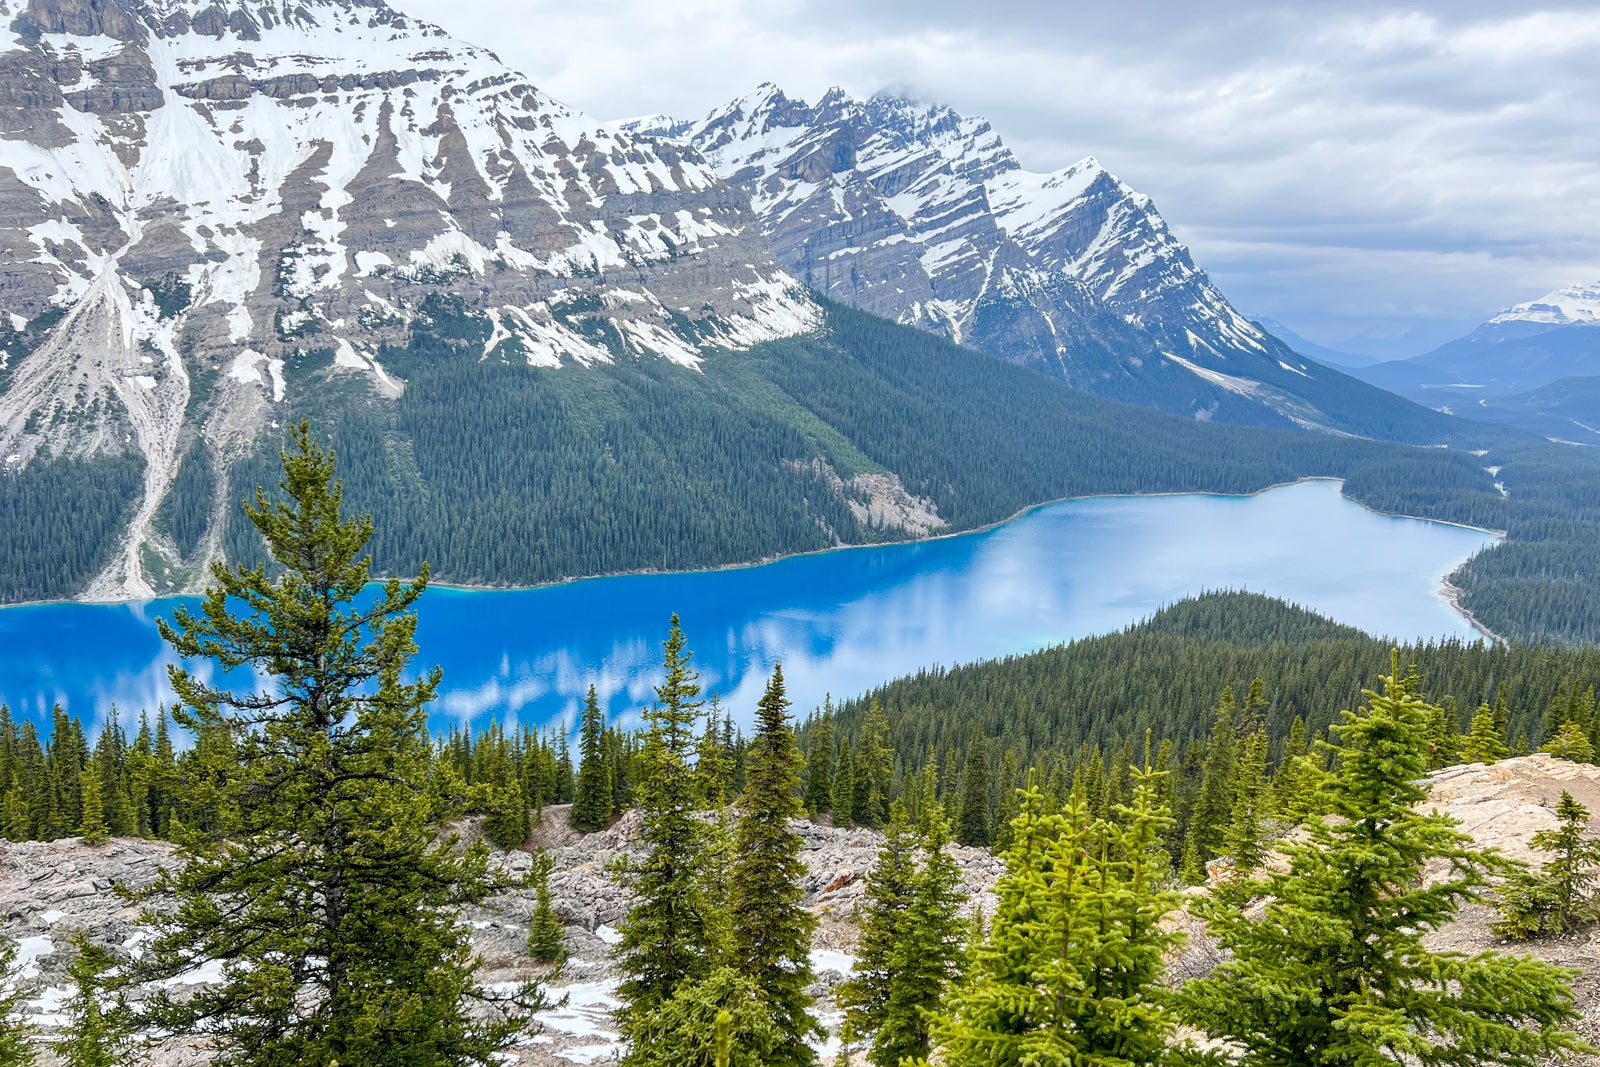 3rd time’s the charm: Finally taking a Canadian dream trip to Banff, Lake Louise and Jasper